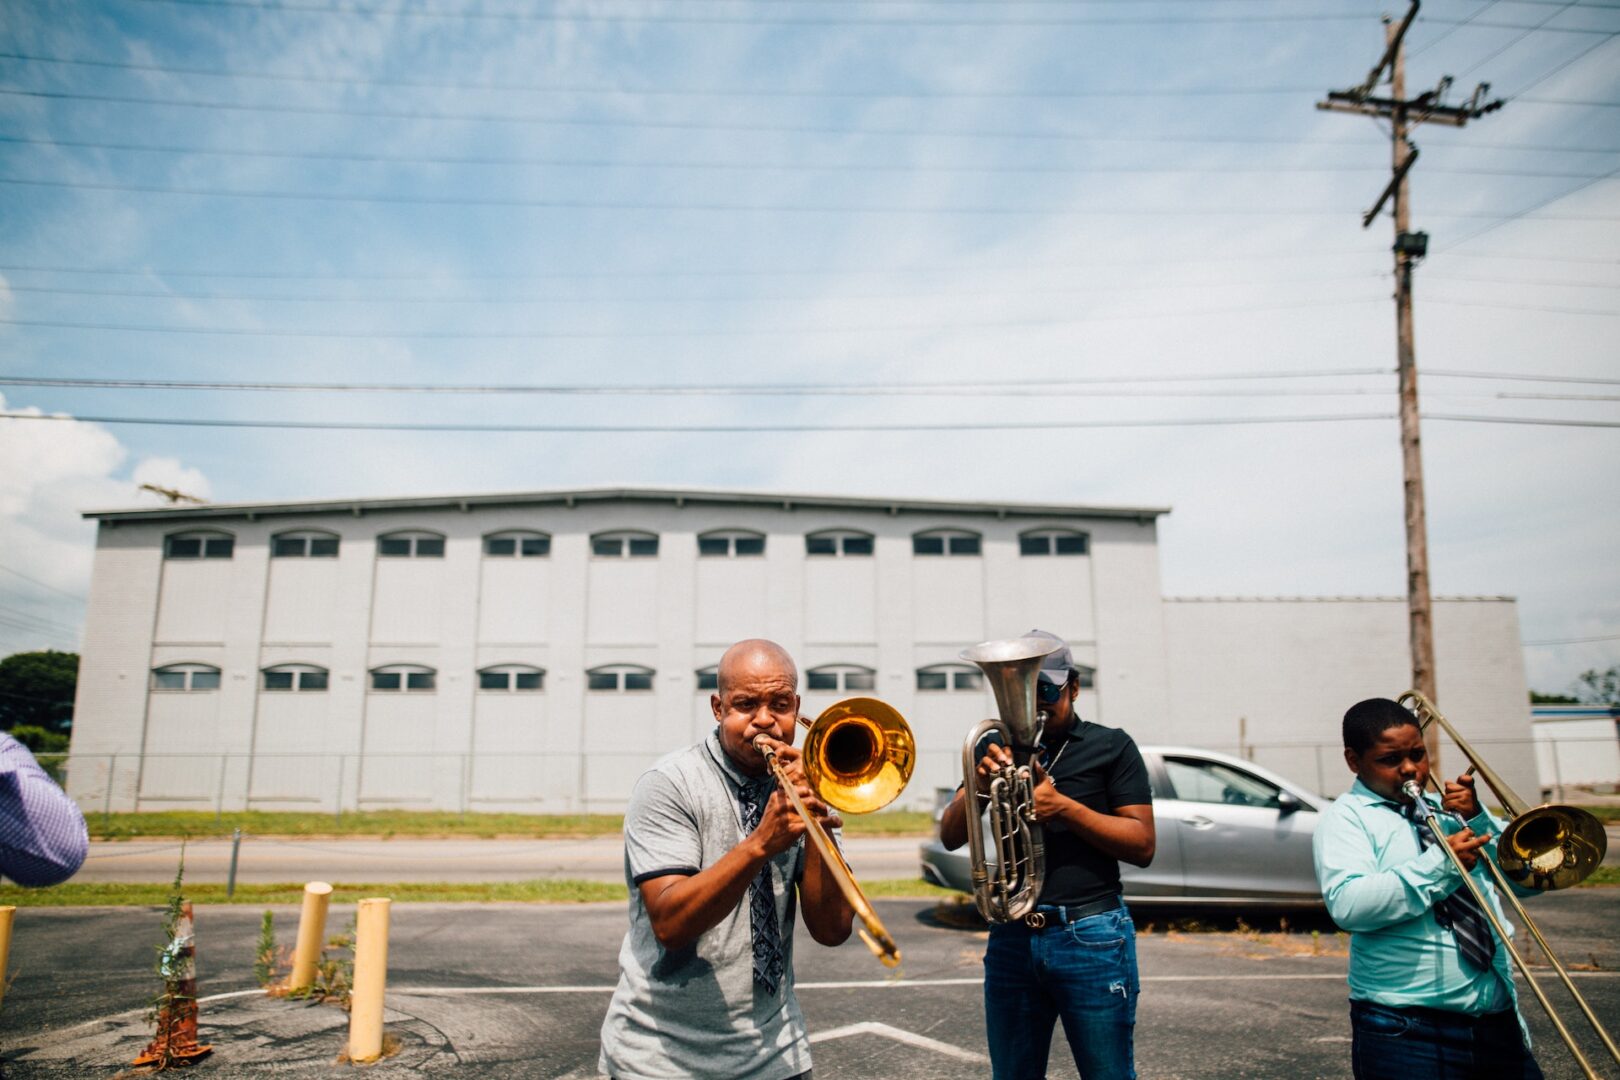 Two men playing their instruments in a parking lot.